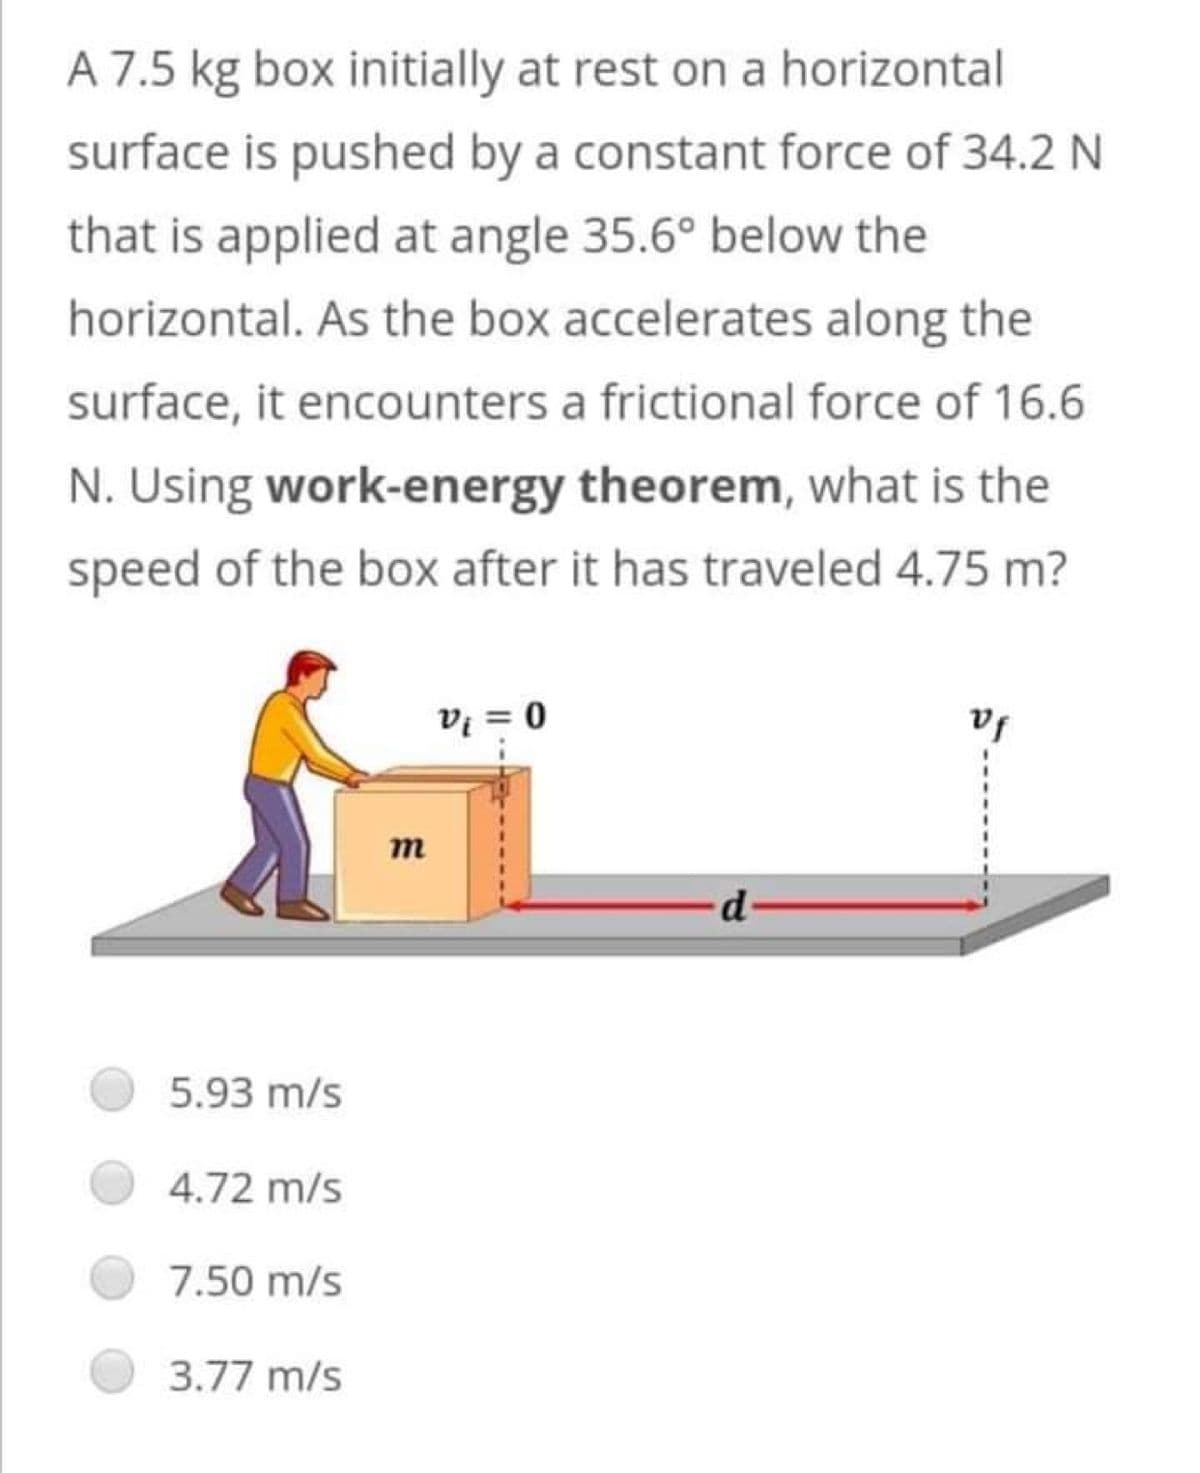 A 7.5 kg box initially at rest on a horizontal
surface is pushed by a constant force of 34.2 N
that is applied at angle 35.6° below the
horizontal. As the box accelerates along the
surface, it encounters a frictional force of 16.6
N. Using work-energy theorem, what is the
speed of the box after it has traveled 4.75 m?
vf
V₁ = 0
d-
5.93 m/s
4.72 m/s
7.50 m/s
3.77 m/s
m